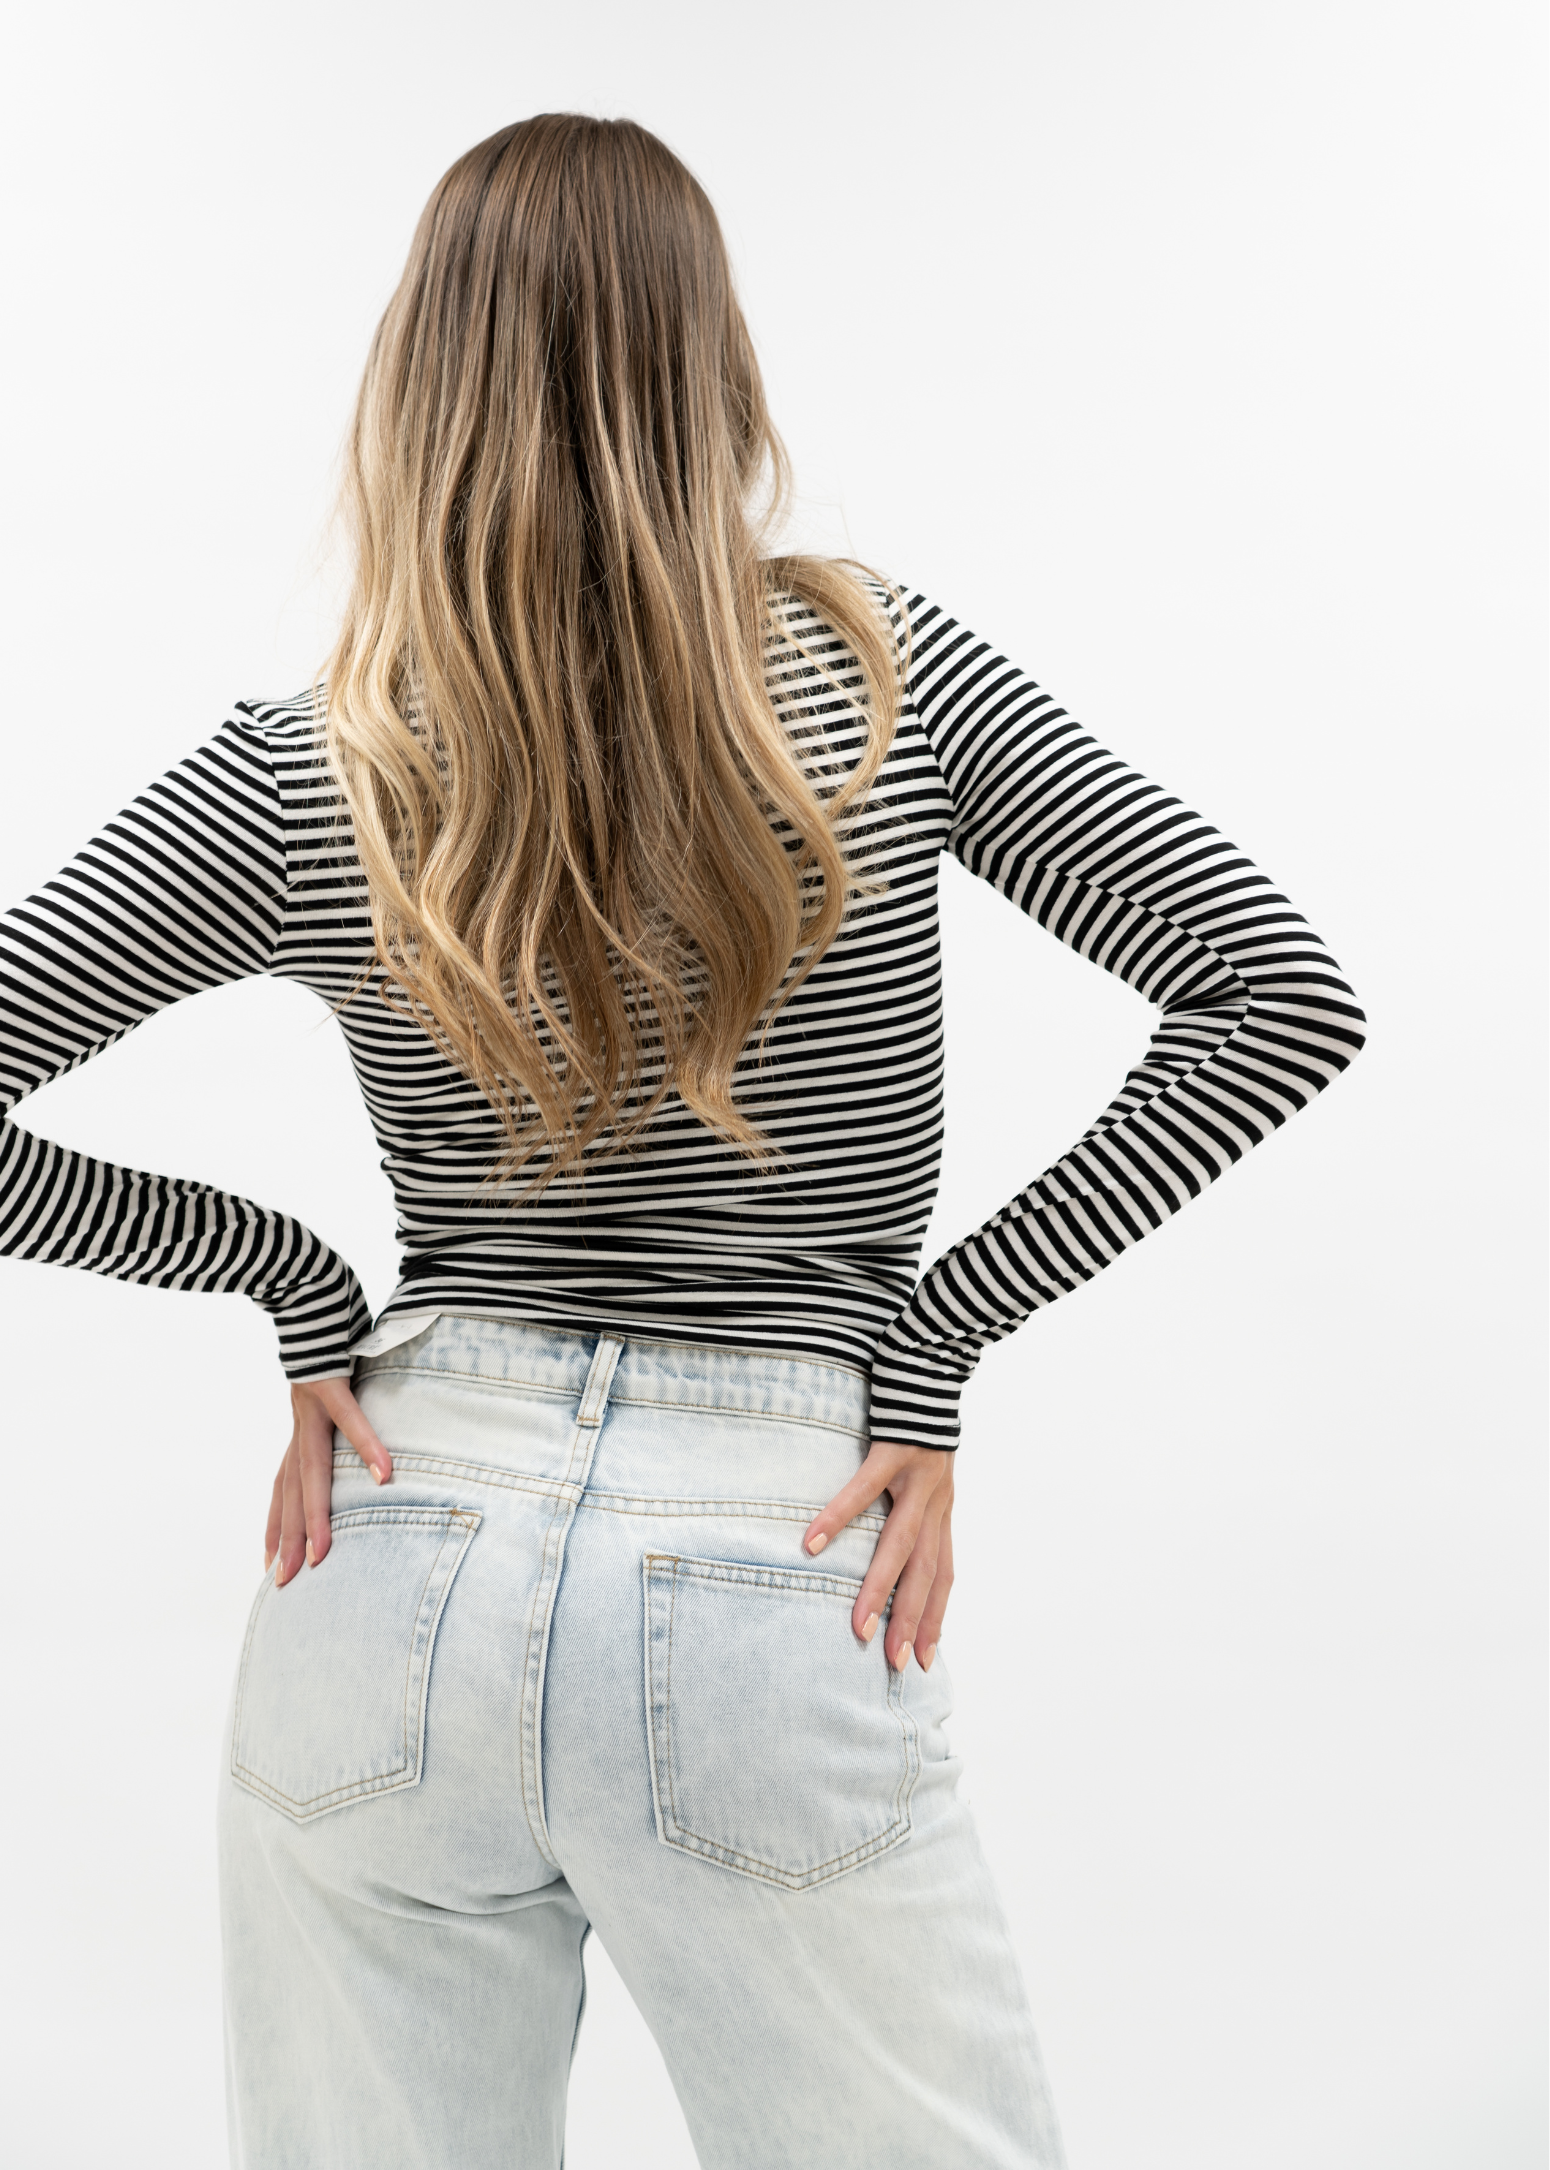 Long sleeve top striped